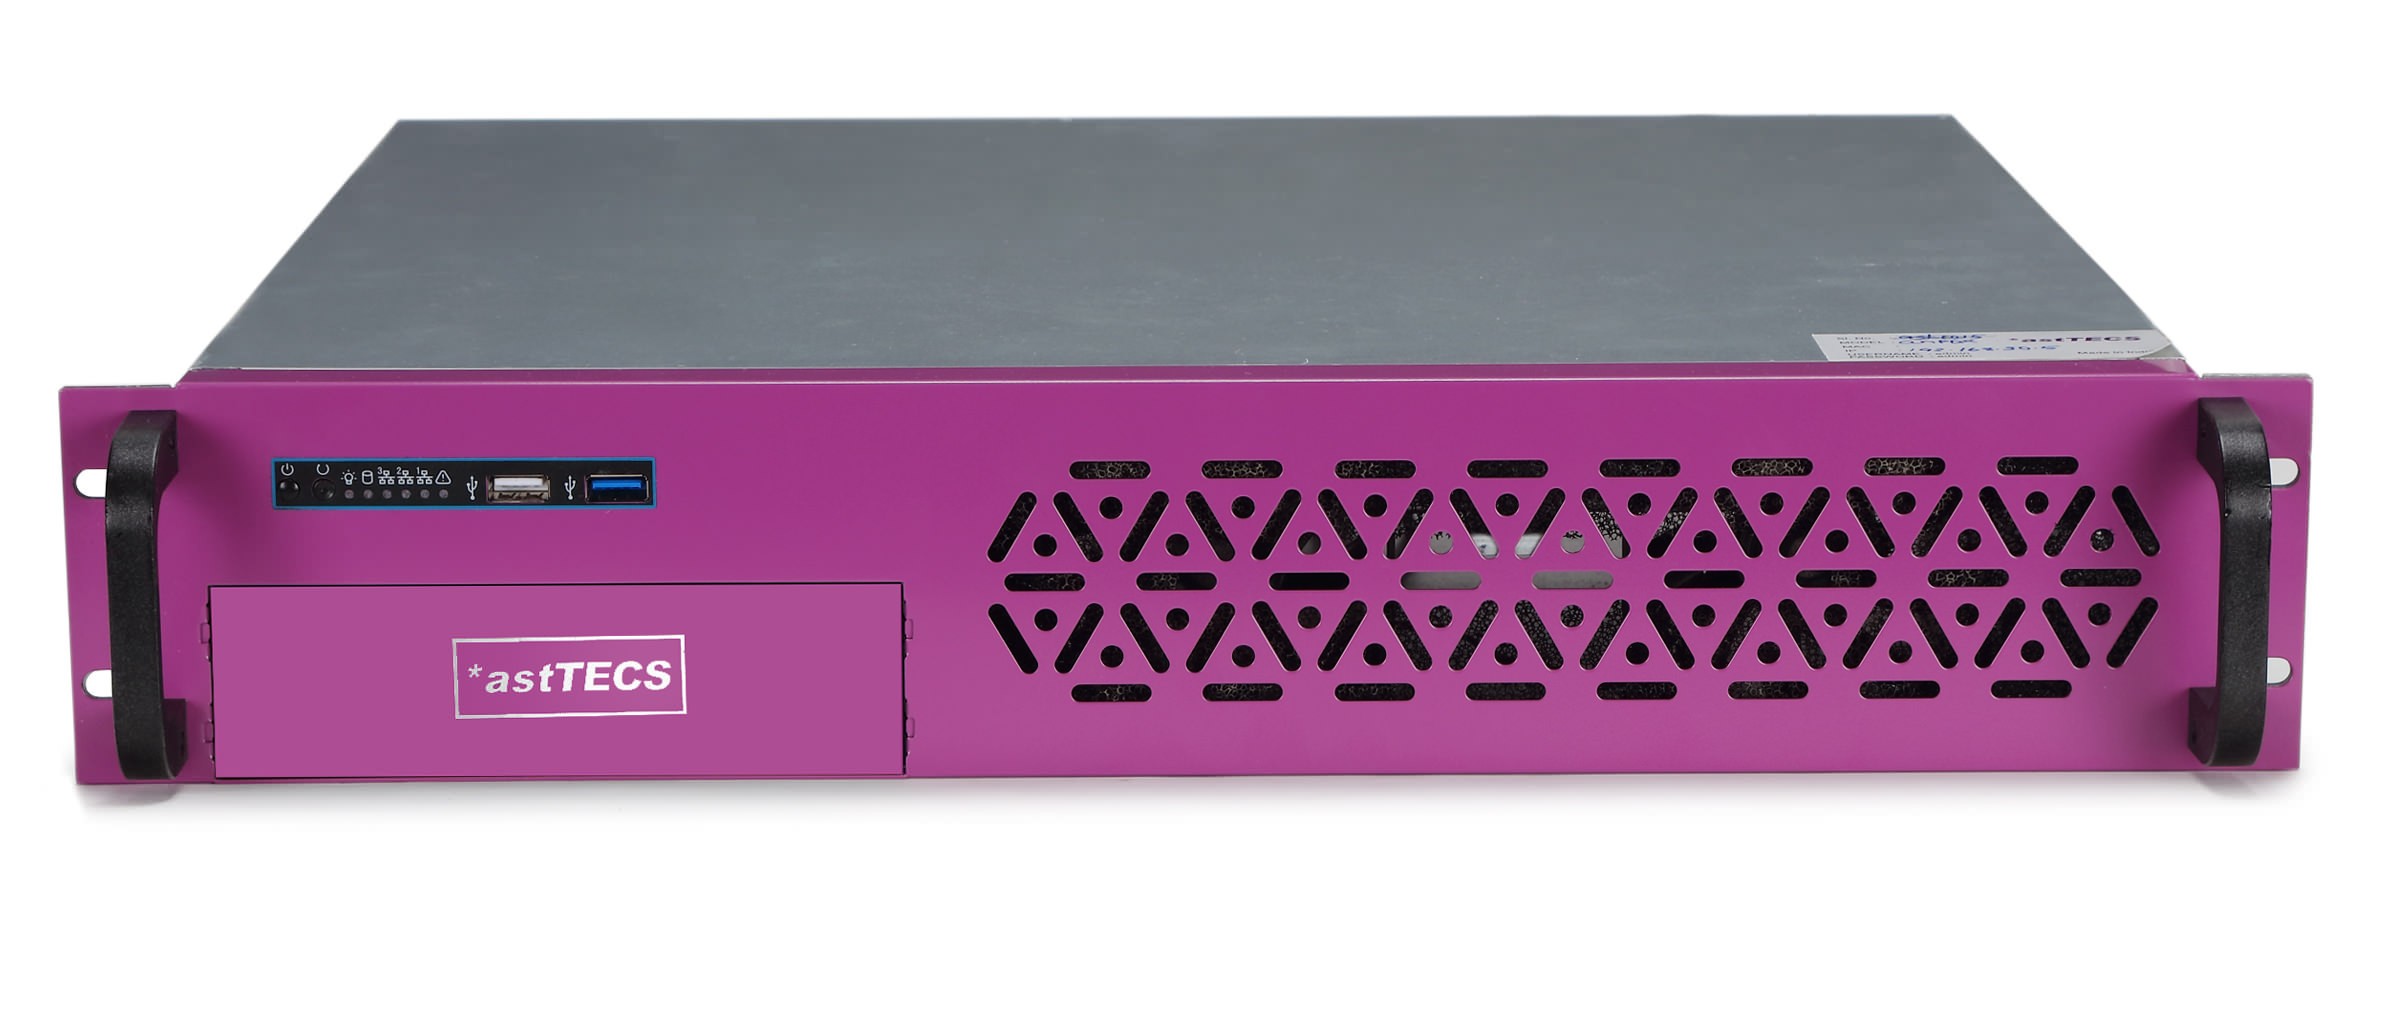 Asterisk IP PBX with 25 extenstions